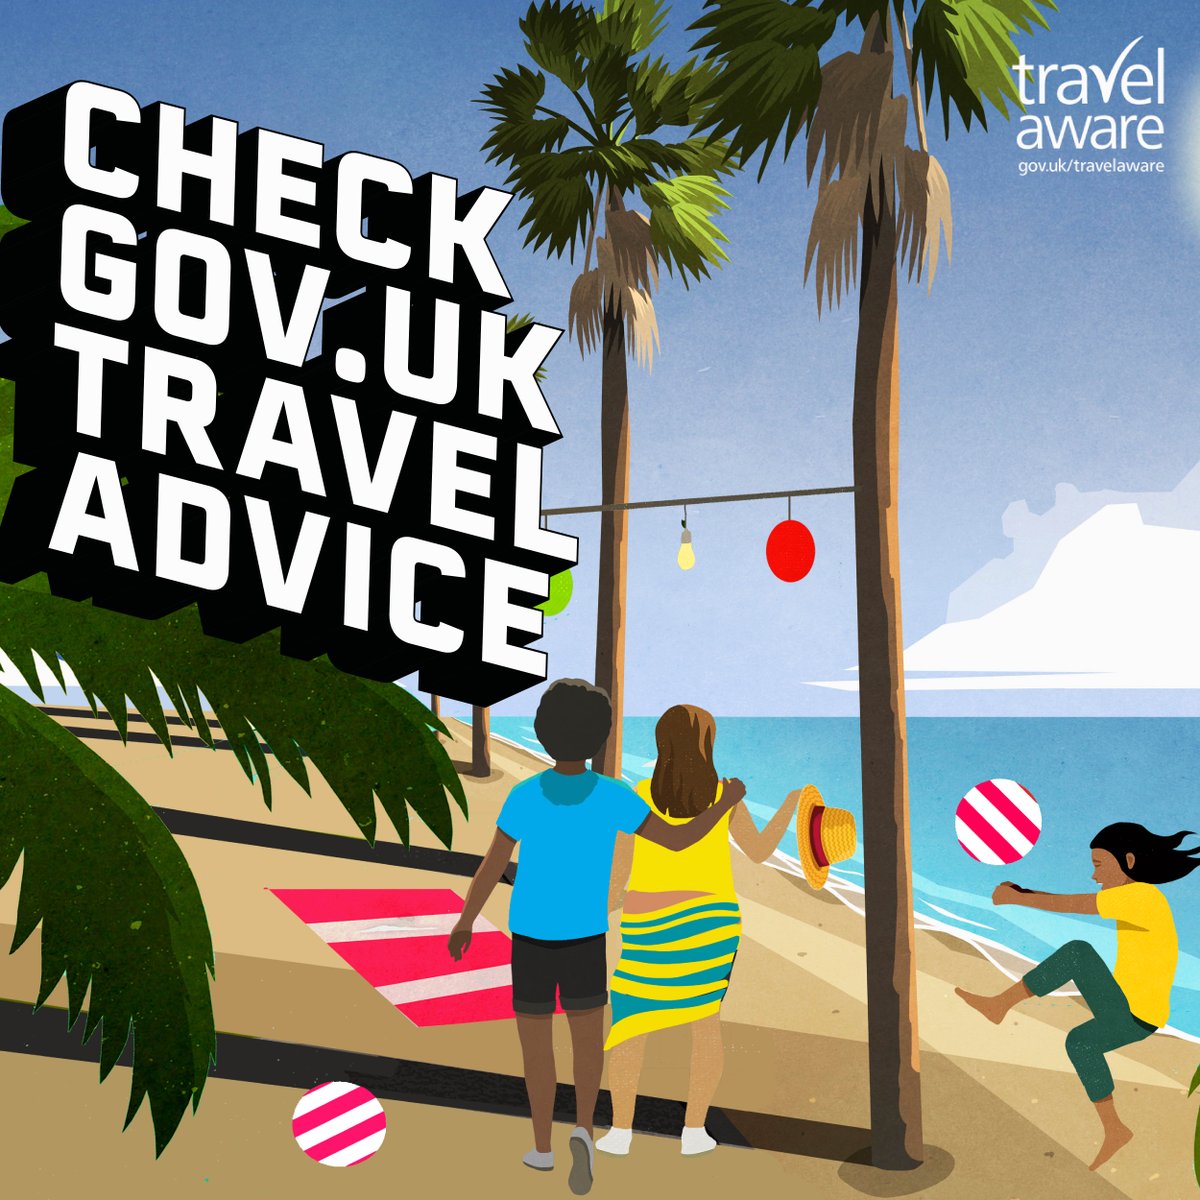 Heading abroad this April?

Check Travel Advice for all the latest information on your destination – including local laws, entry requirements and safety and security.

You can also sign up for email alerts and be notified of any changes

ow.ly/hNon50RcreF

#TravelAware